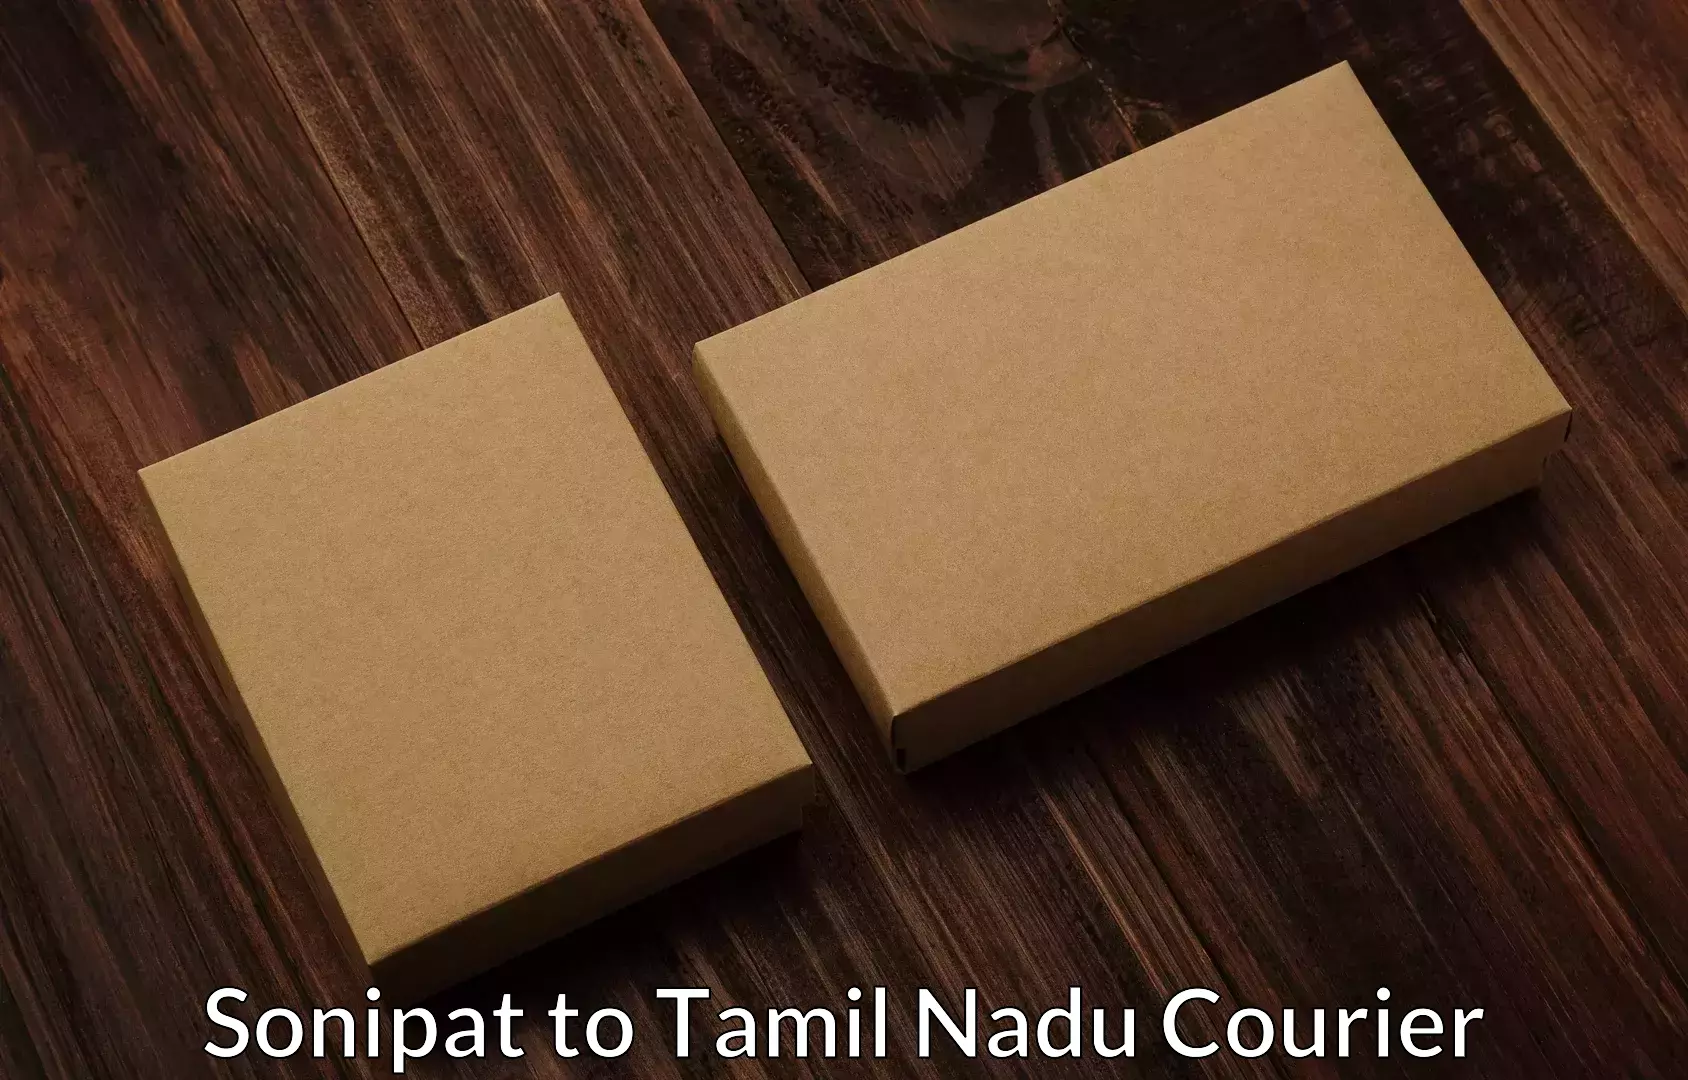 Home relocation experts Sonipat to Tamil Nadu